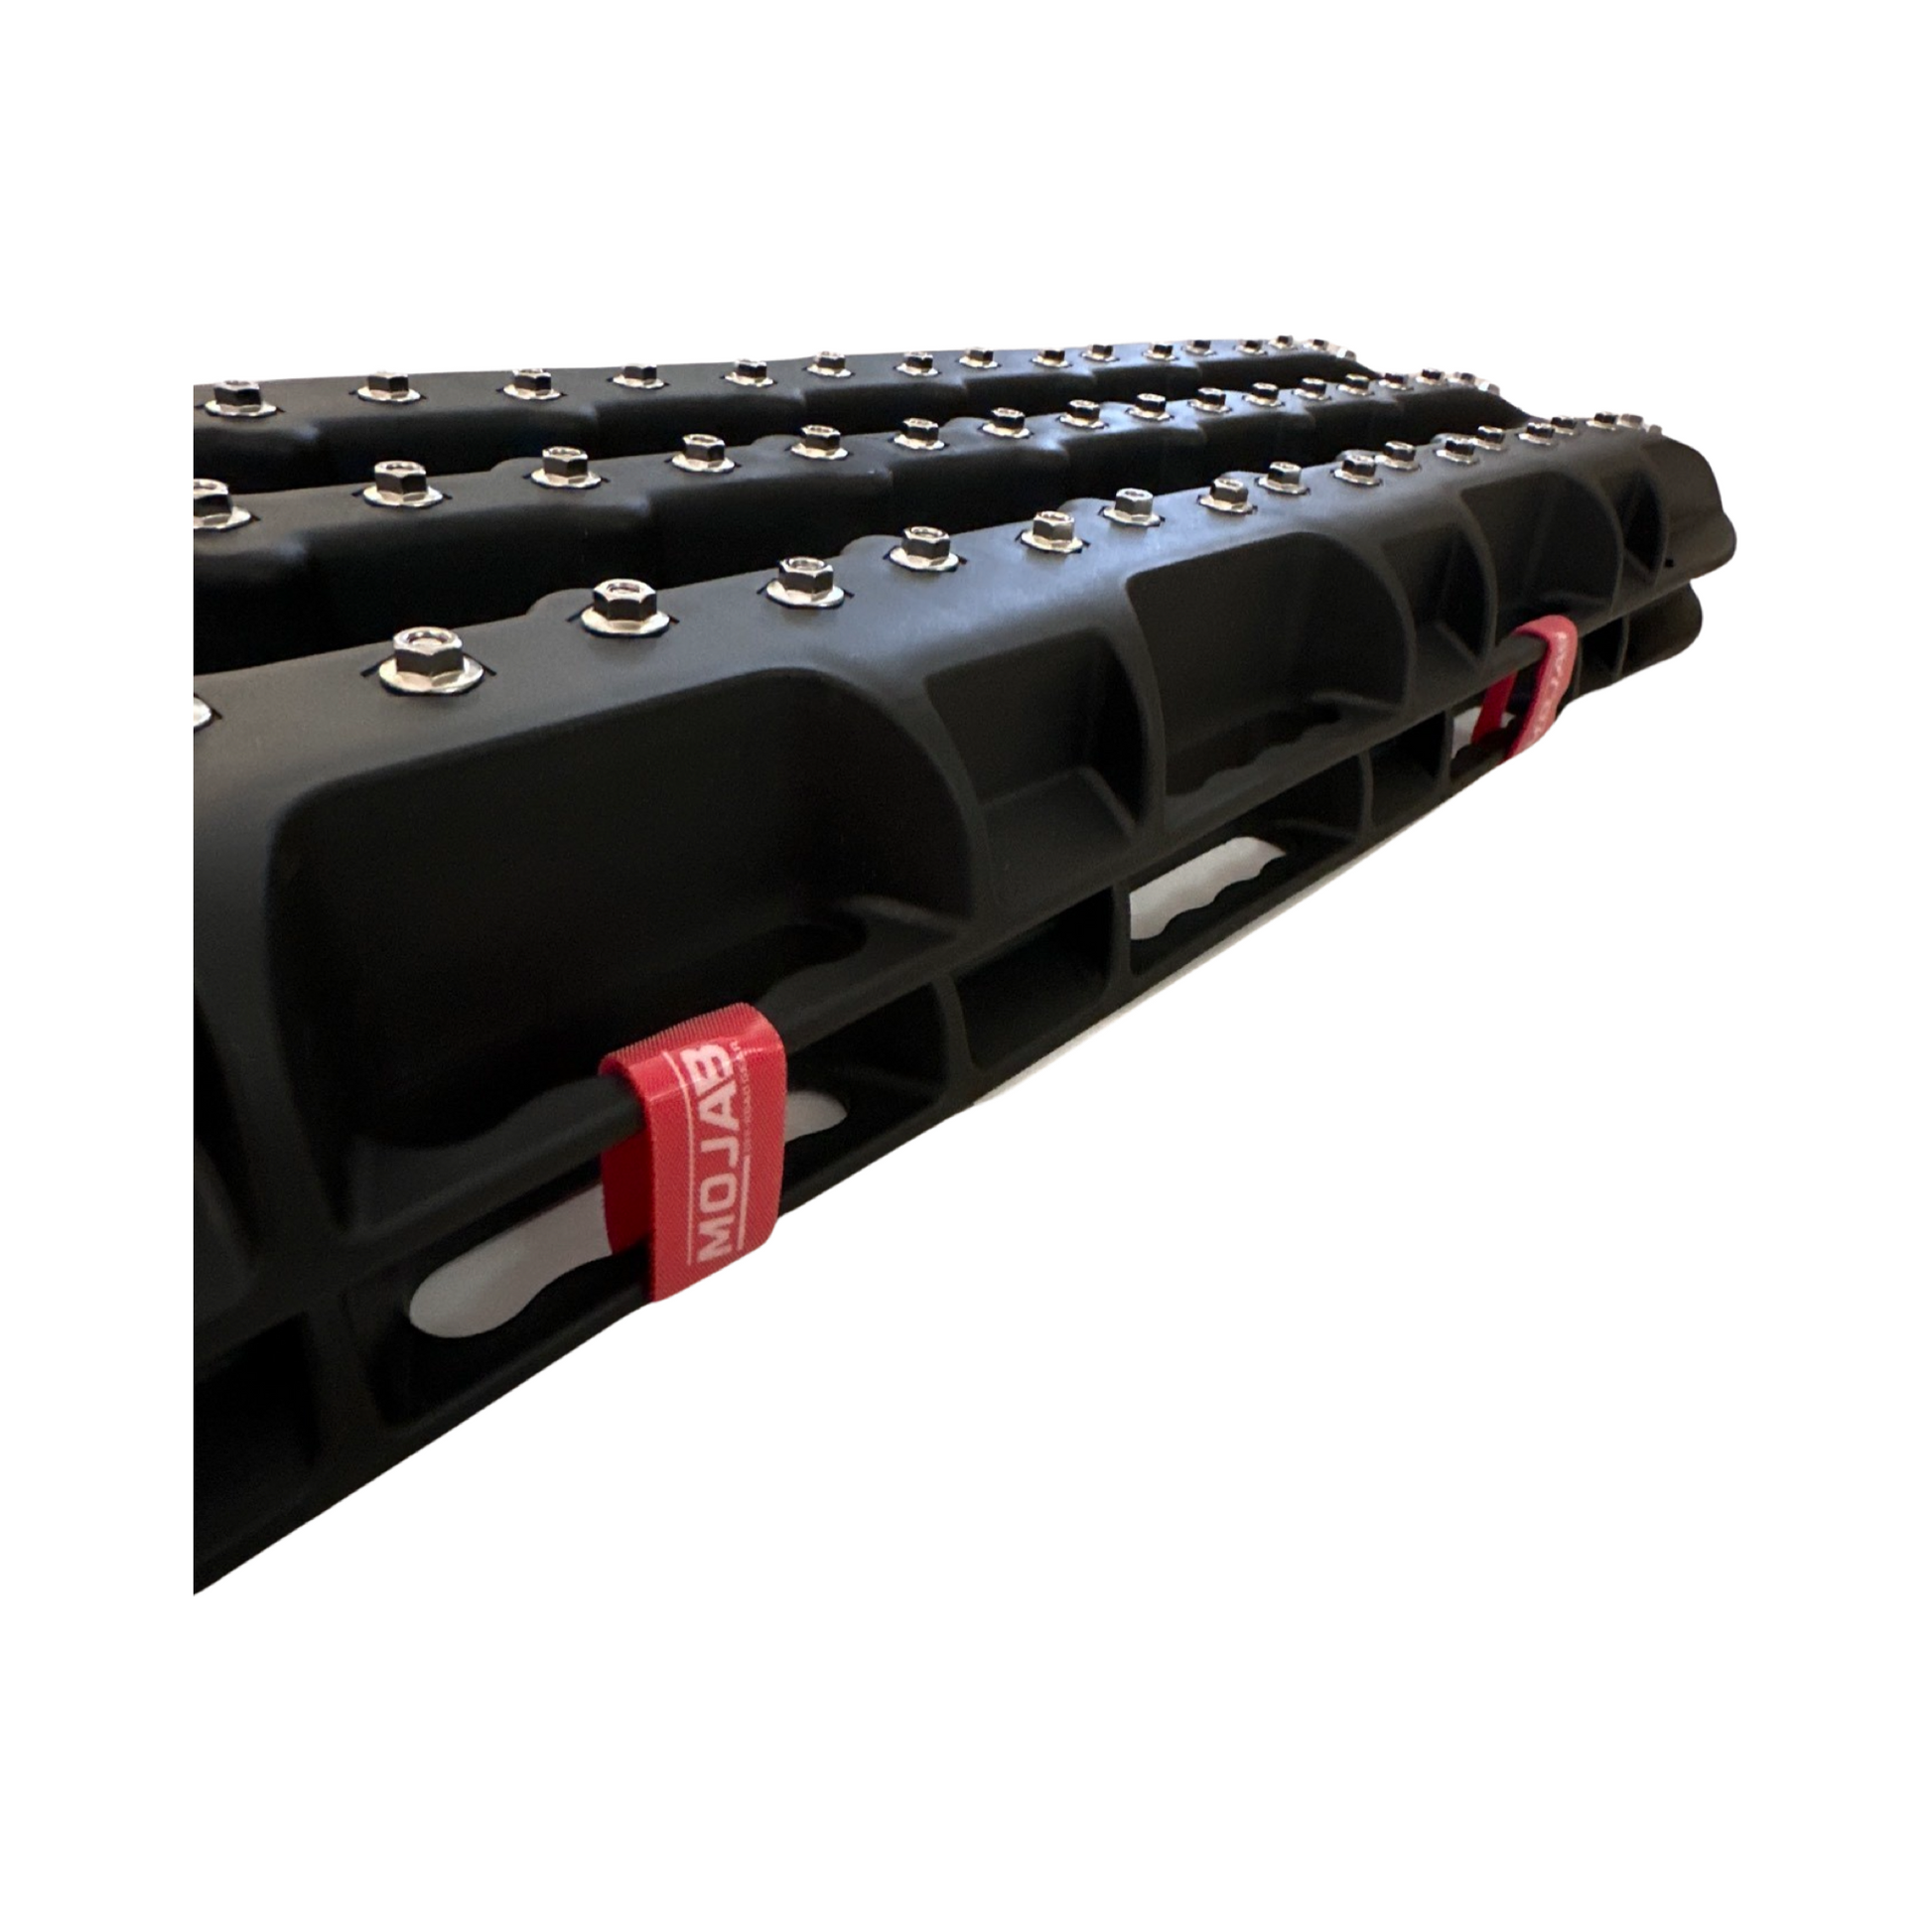 Ultimate Traction recovery board with steel plugs and storage bag